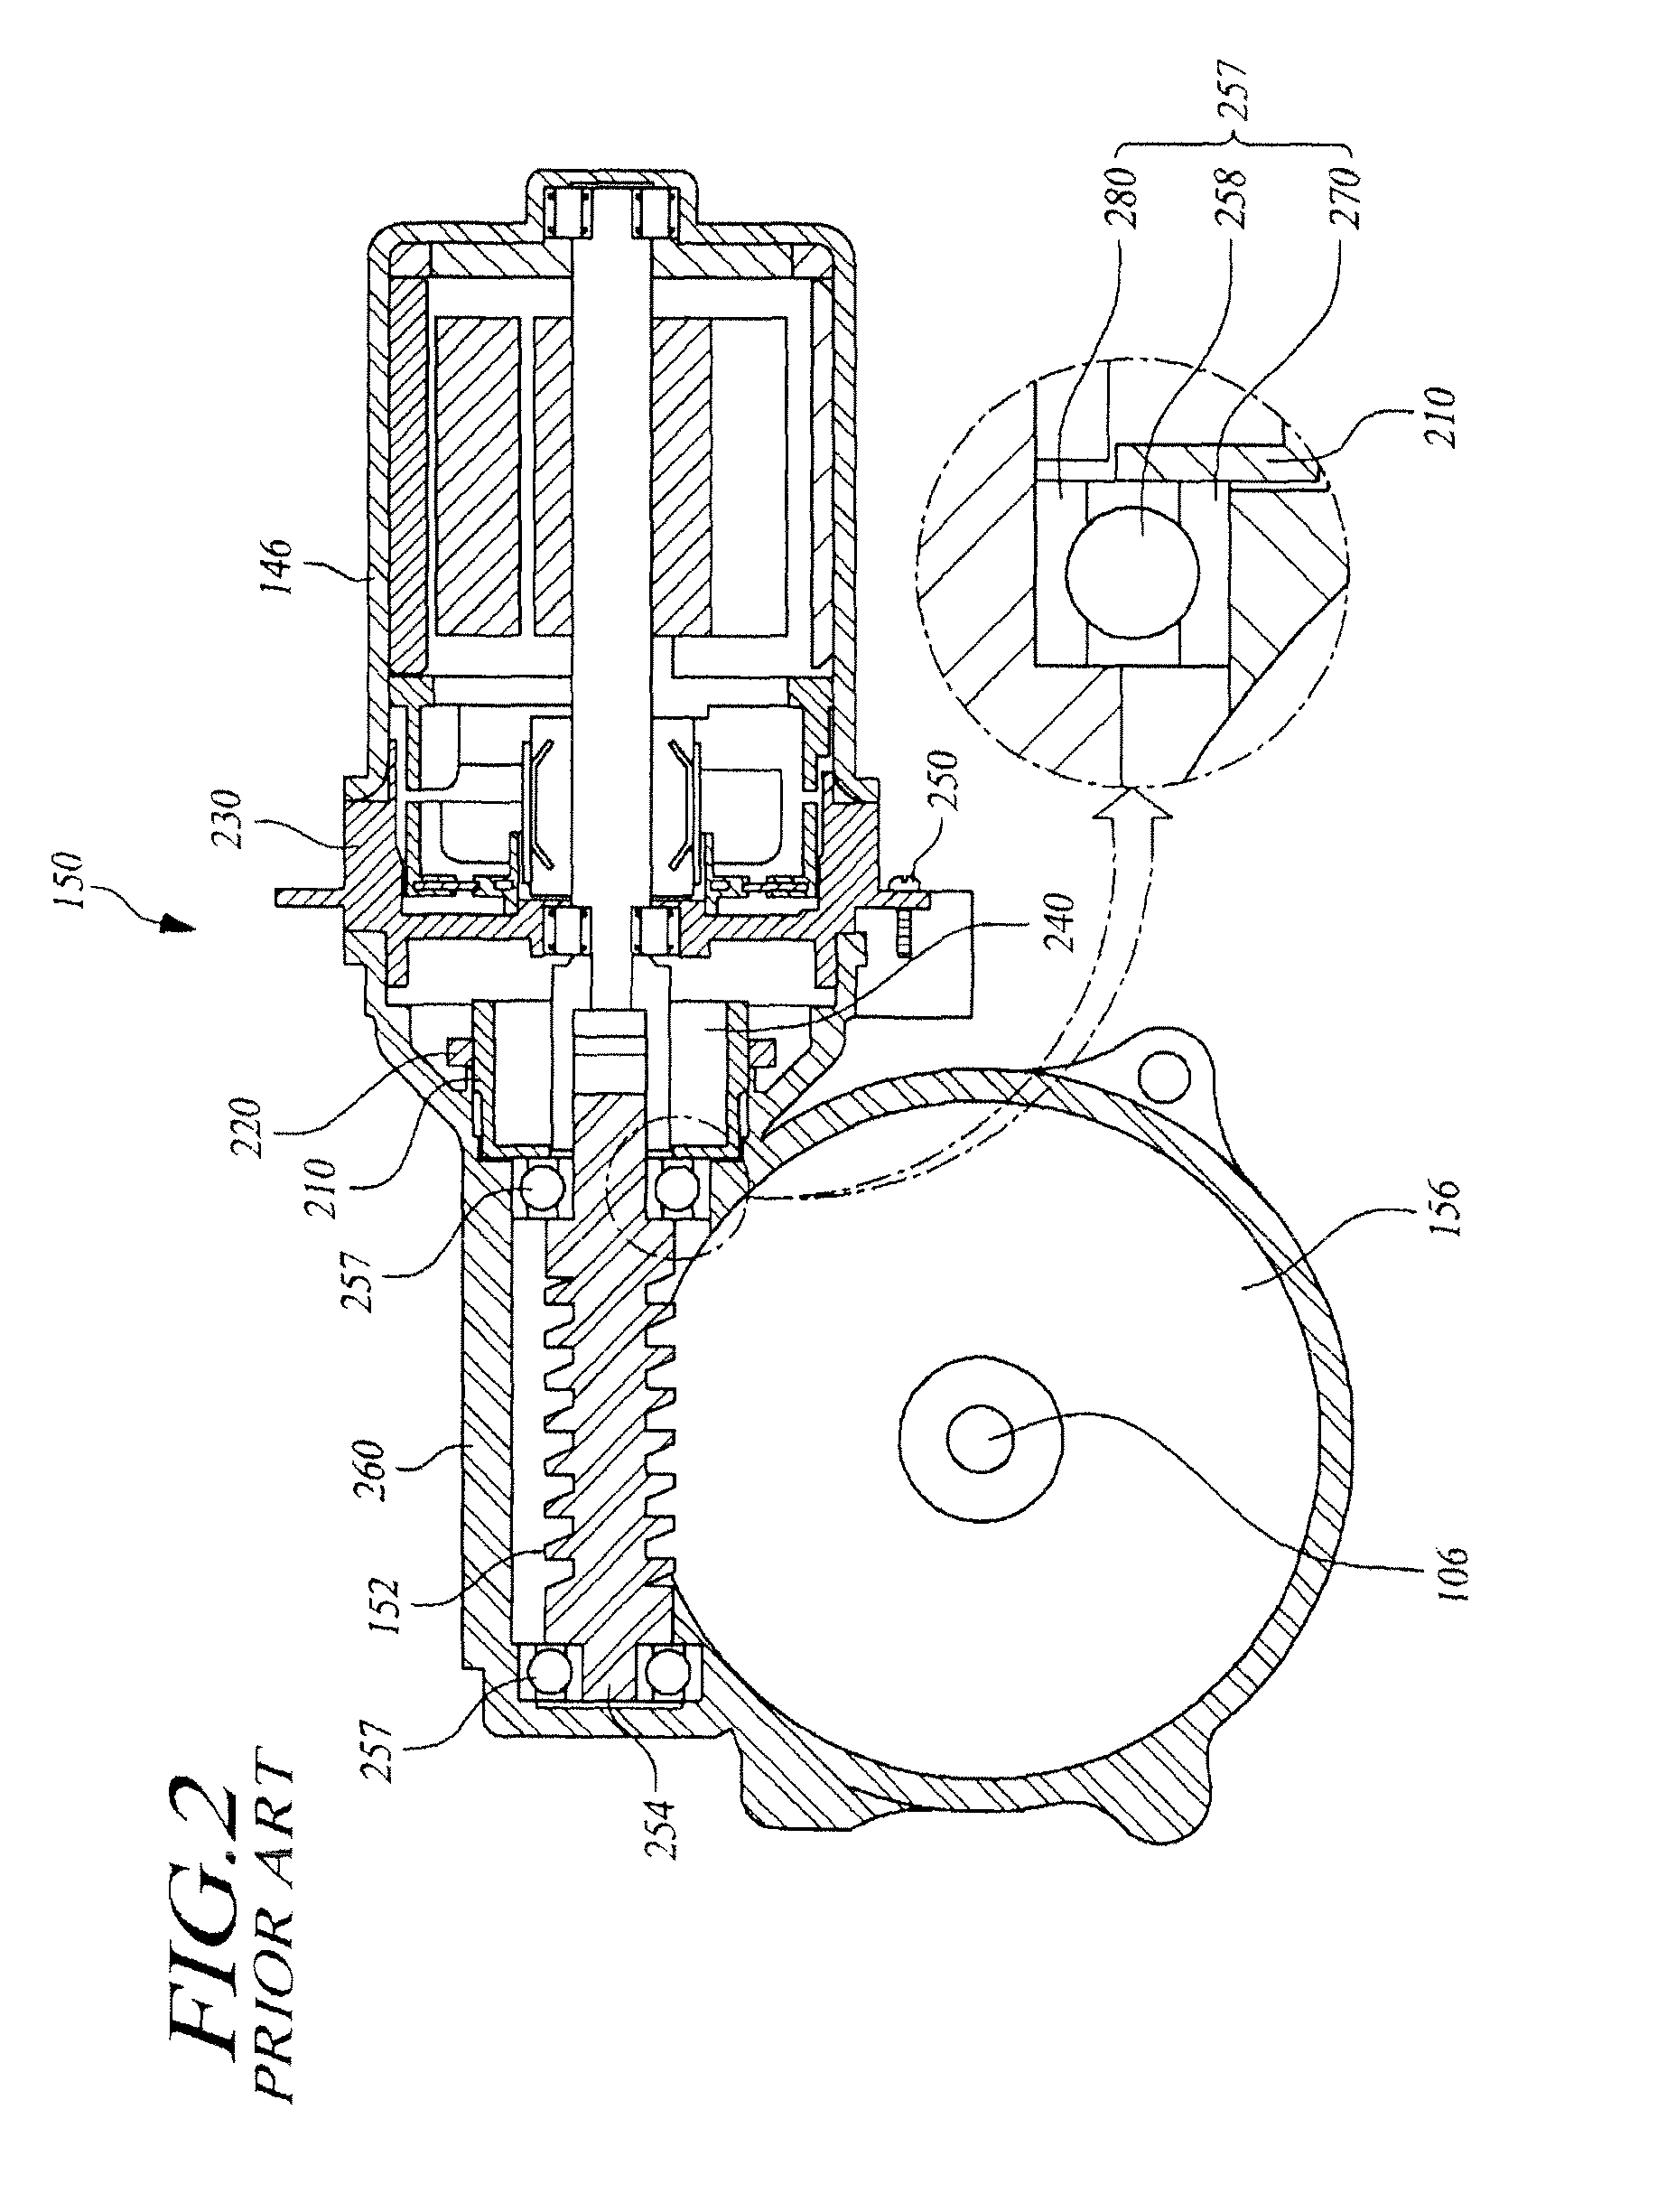 Reducer of electronic power steering apparatus